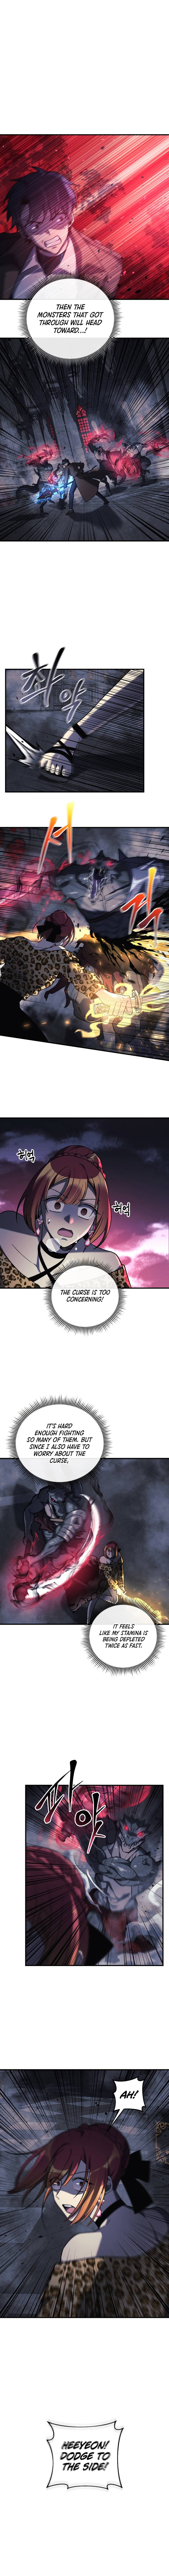 Read My Daughter is the Final Boss My Daughter is the Final Boss - Chapter 54 5